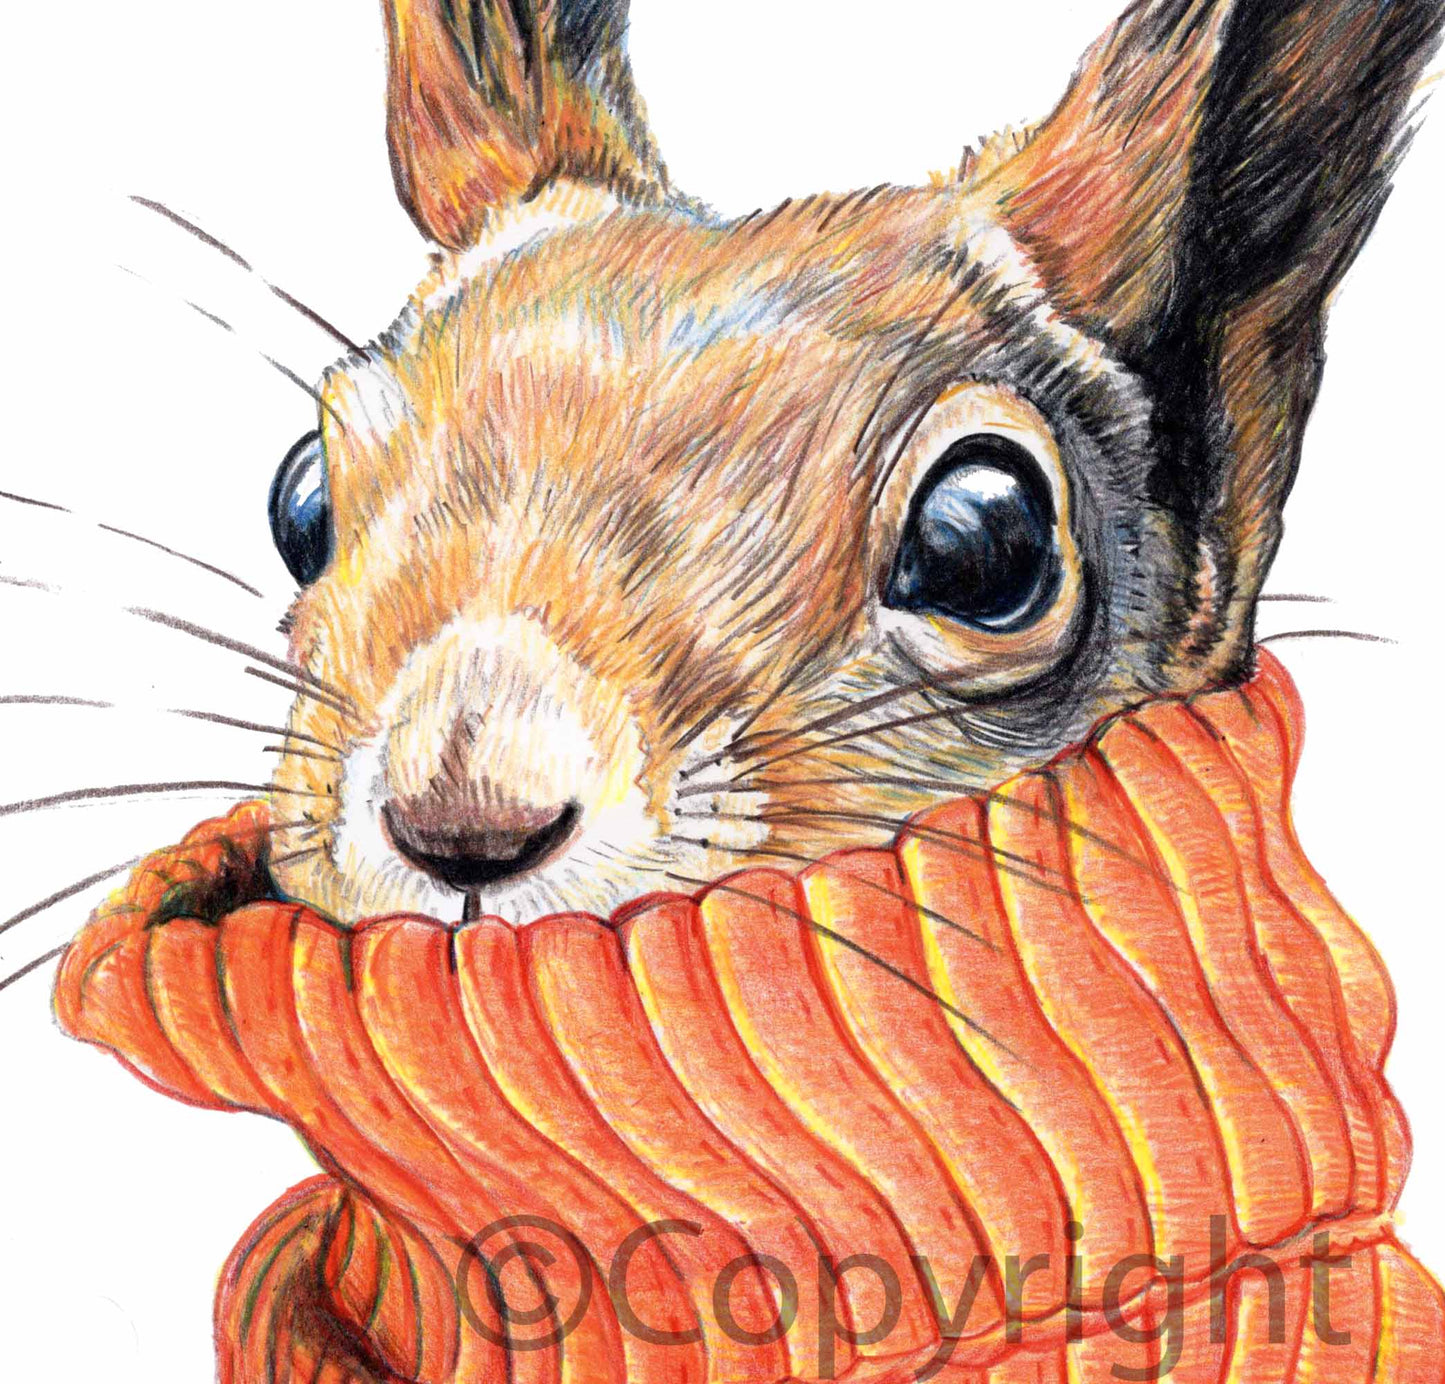 Coloured pencil drawing of a European red squirrel wearing an oversized orange turtleneck sweater. Art by Deidre Wicks